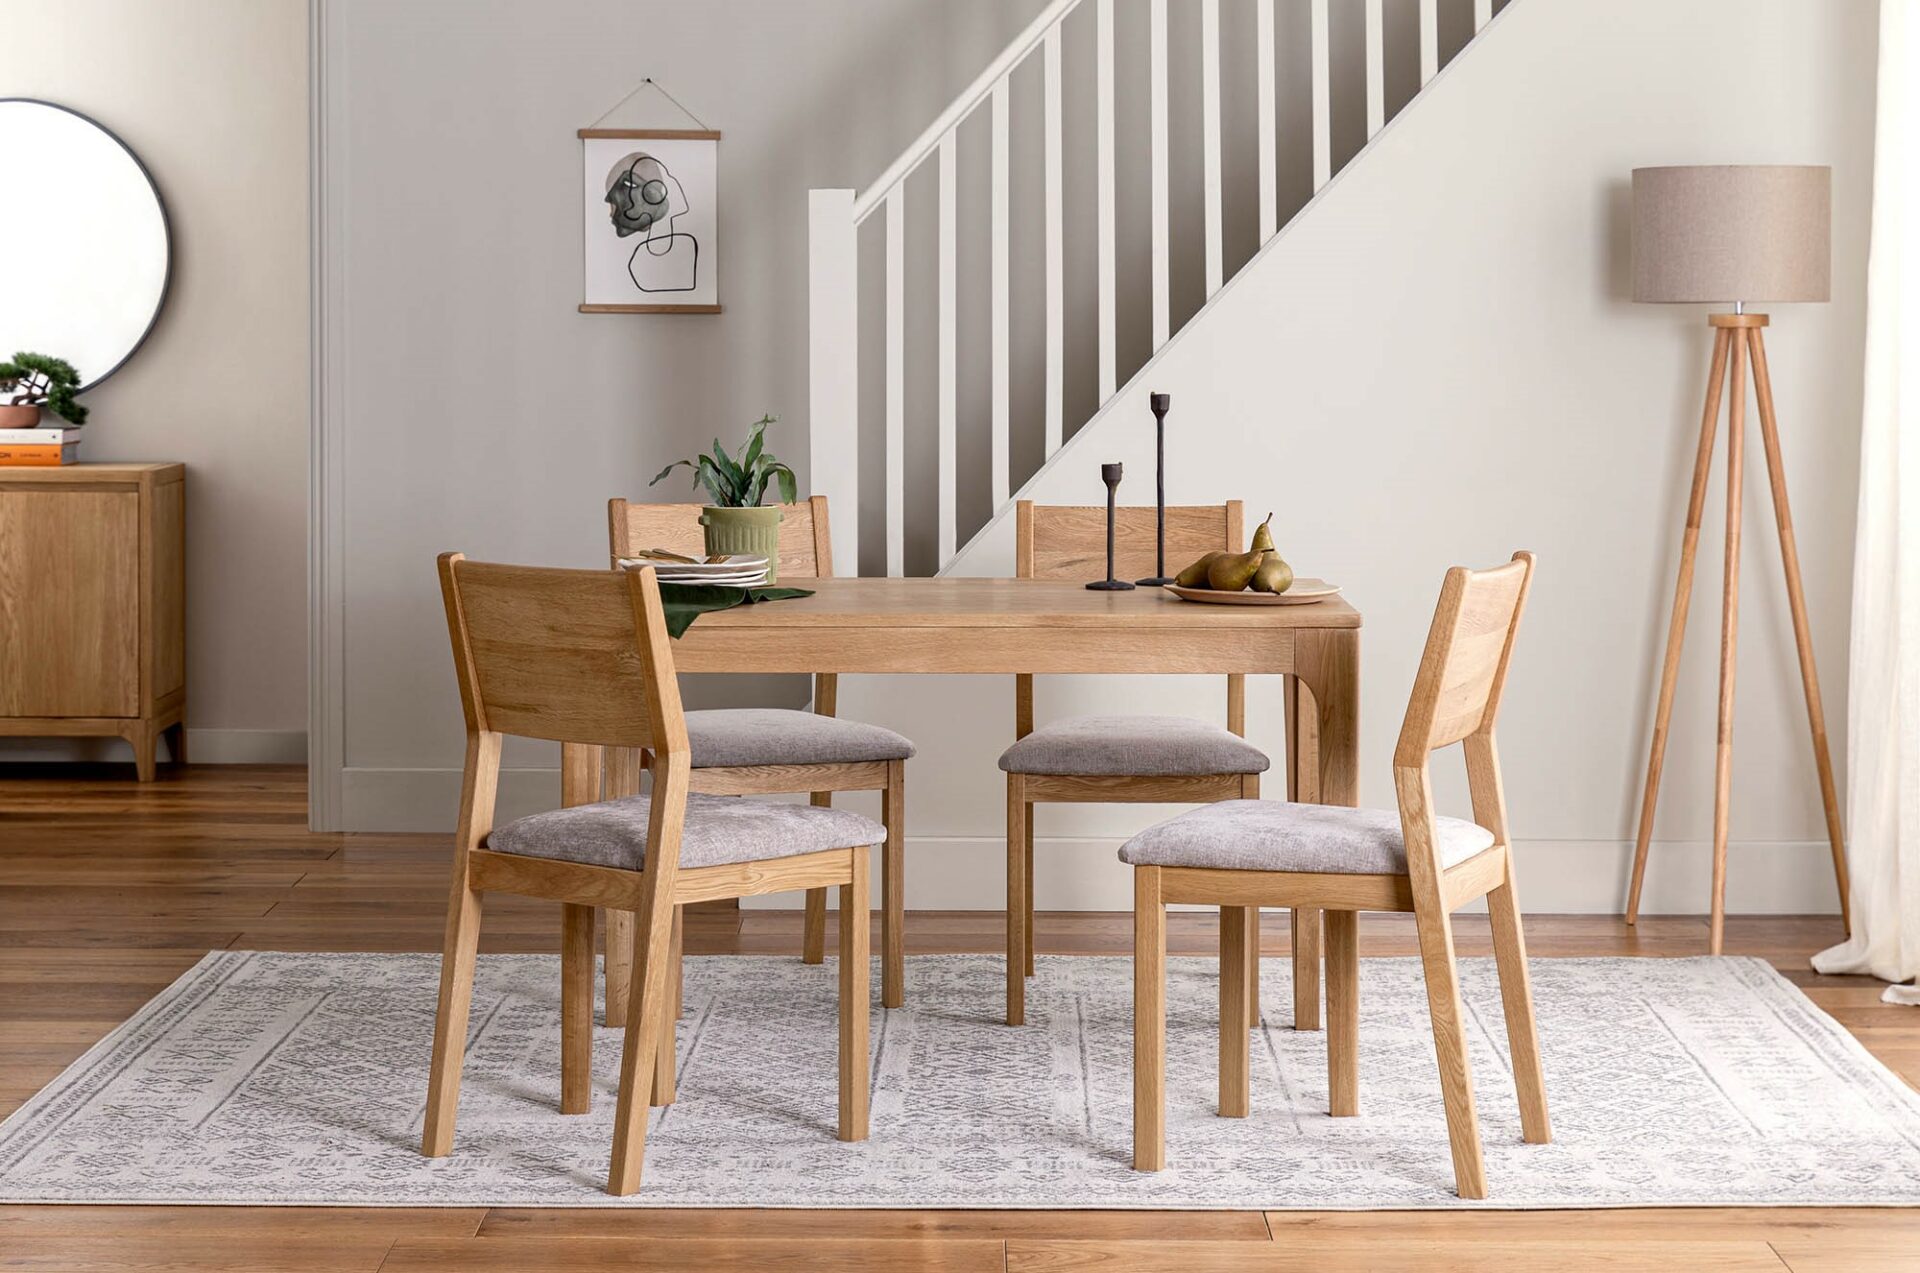 A dining table and dining chairs-dining furniture-wooden dining table-upholstered dining chairs